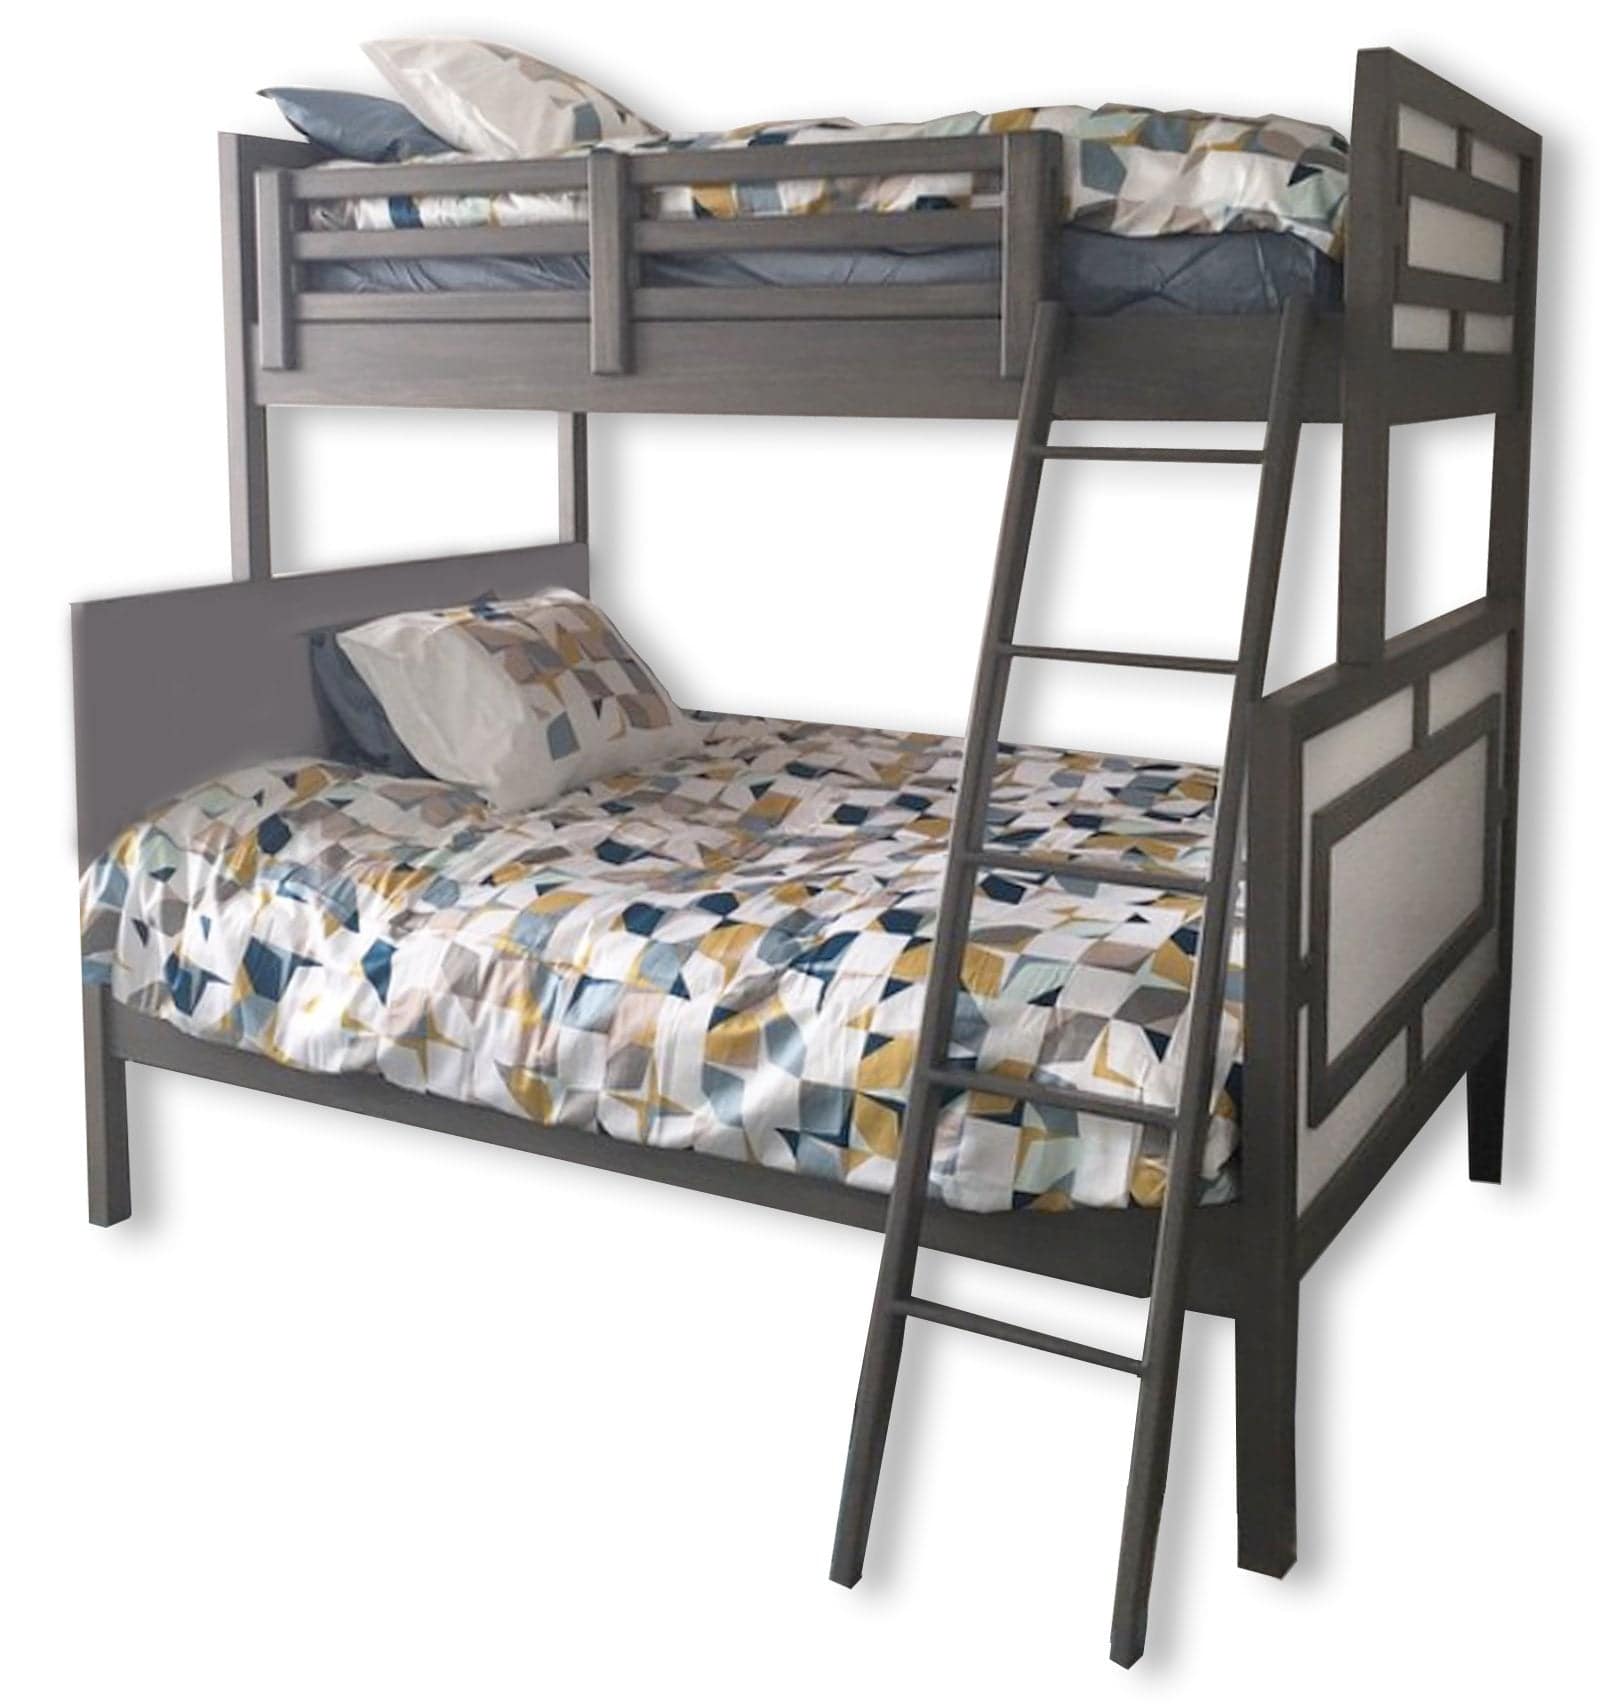 Max Twin over Full Bunk Bed - Twinkle Twinkle Little One